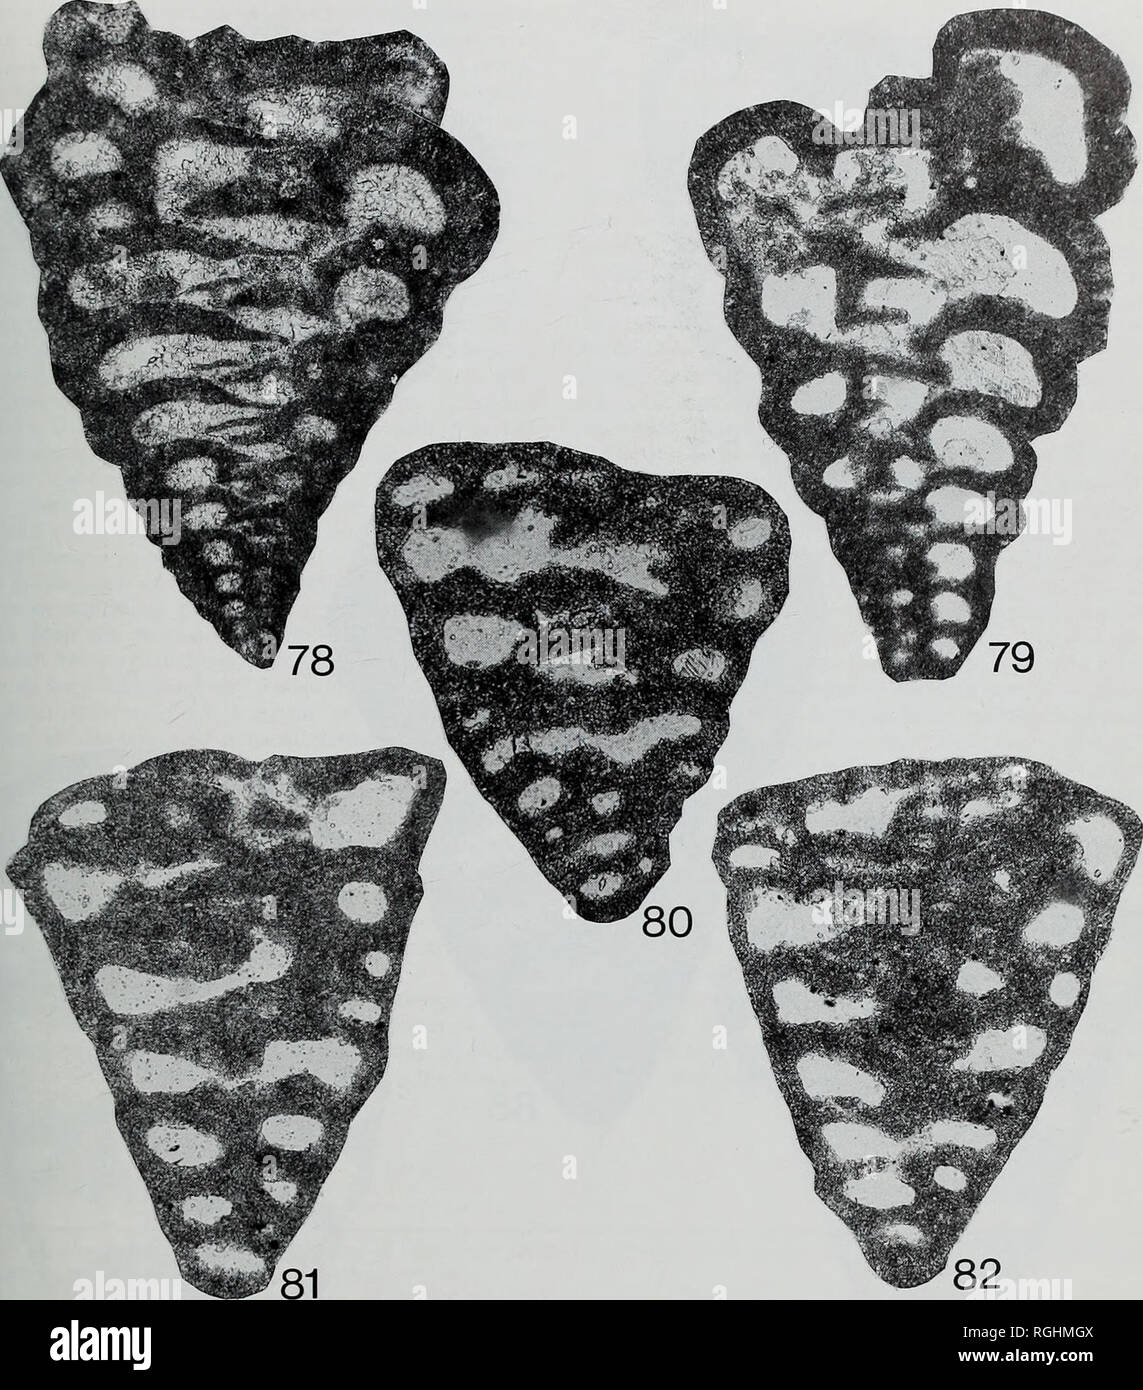 . Bulletin of the British Museum (Natural History), Geology. MESOZOIC CHRYSALIDINIDAE OF MIDDLE EAST 141. ig. 78 Redmondoides lugeoni (Septfontaine), BMNH P 52621, from United Arab Emirates, off-shore Abu Dhabi, Izhara Formation, probably Bajocian; length 1180 urn, x 80; note protocanaliculation and canaliculation of the walls of late chambers. rig. 79 Redmondoides rotundatus (Redmond), BMNH P 52622, from off-shore Qatar, Diyab Formation, Oxfordian; length 1080 urn, x 90; note canaliculi in walls of later whorls. ig. 80 Redmondoides cf. inflatus (Redmond), BMNH P 52623, from United Arab Emirat Stock Photo